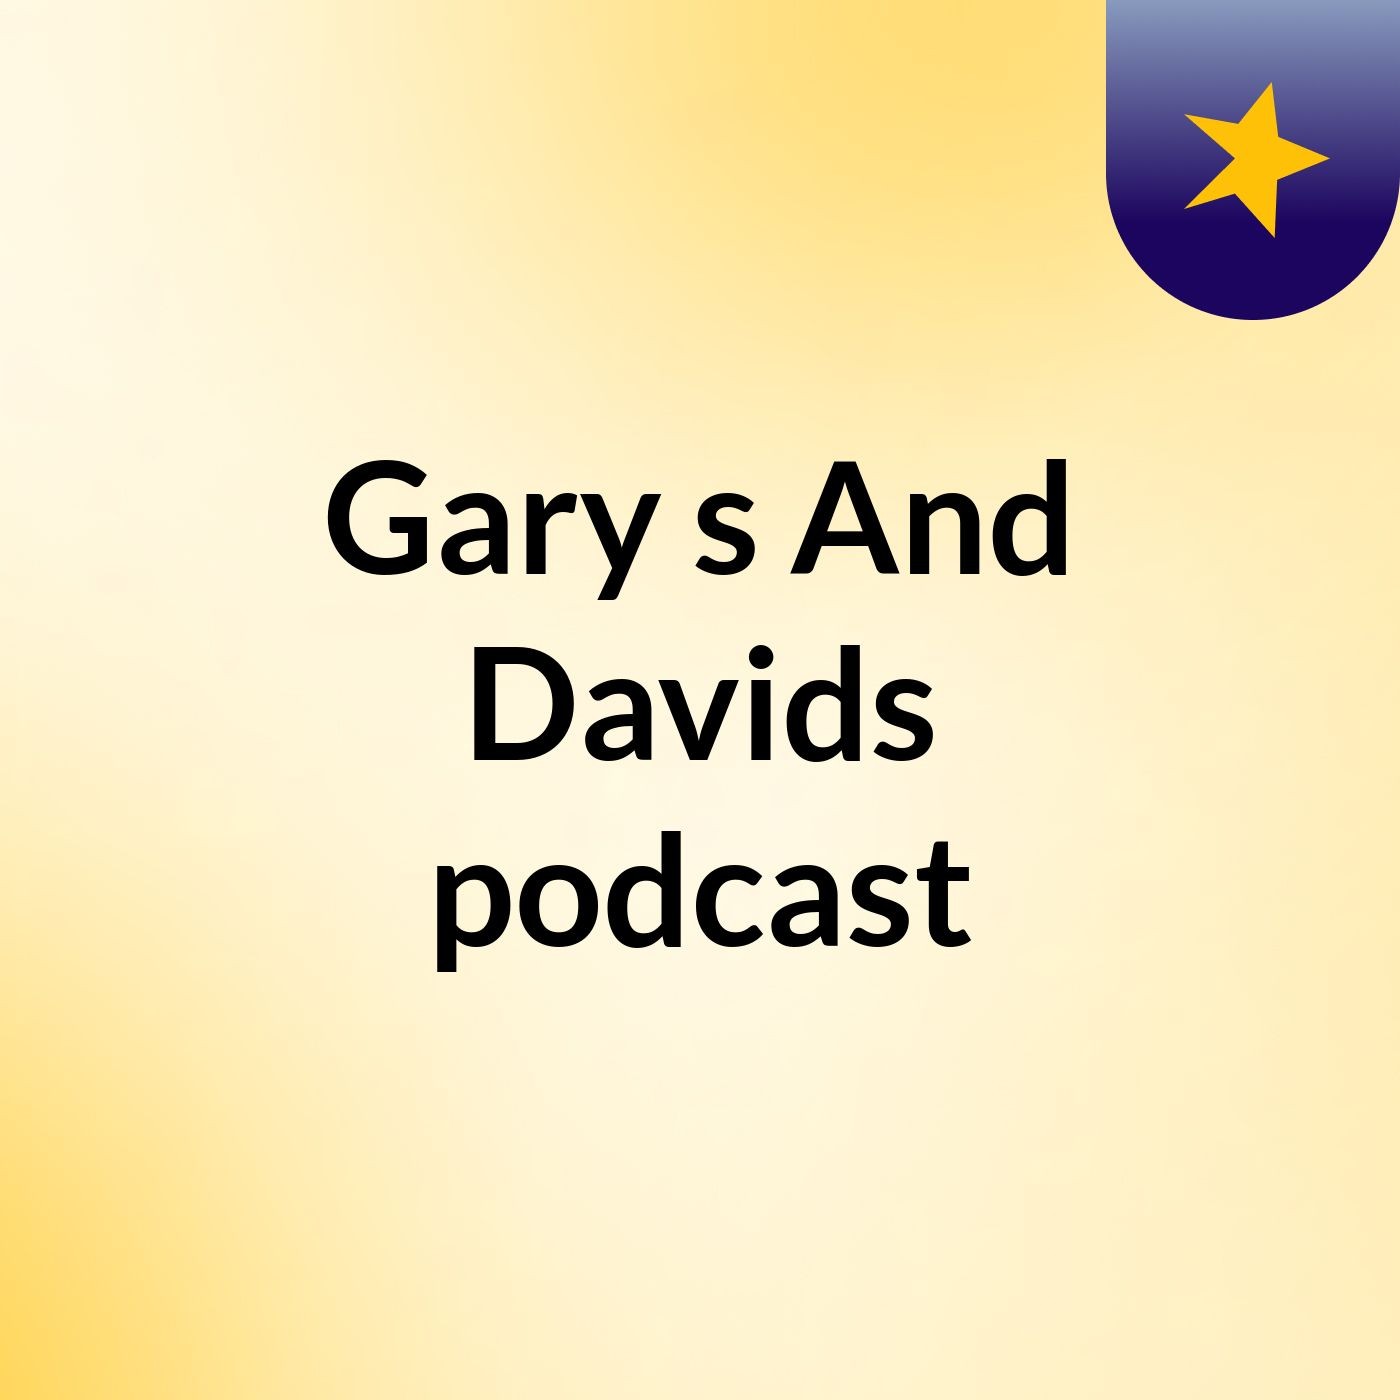 Episode 3 - Gary's And Davids podcast